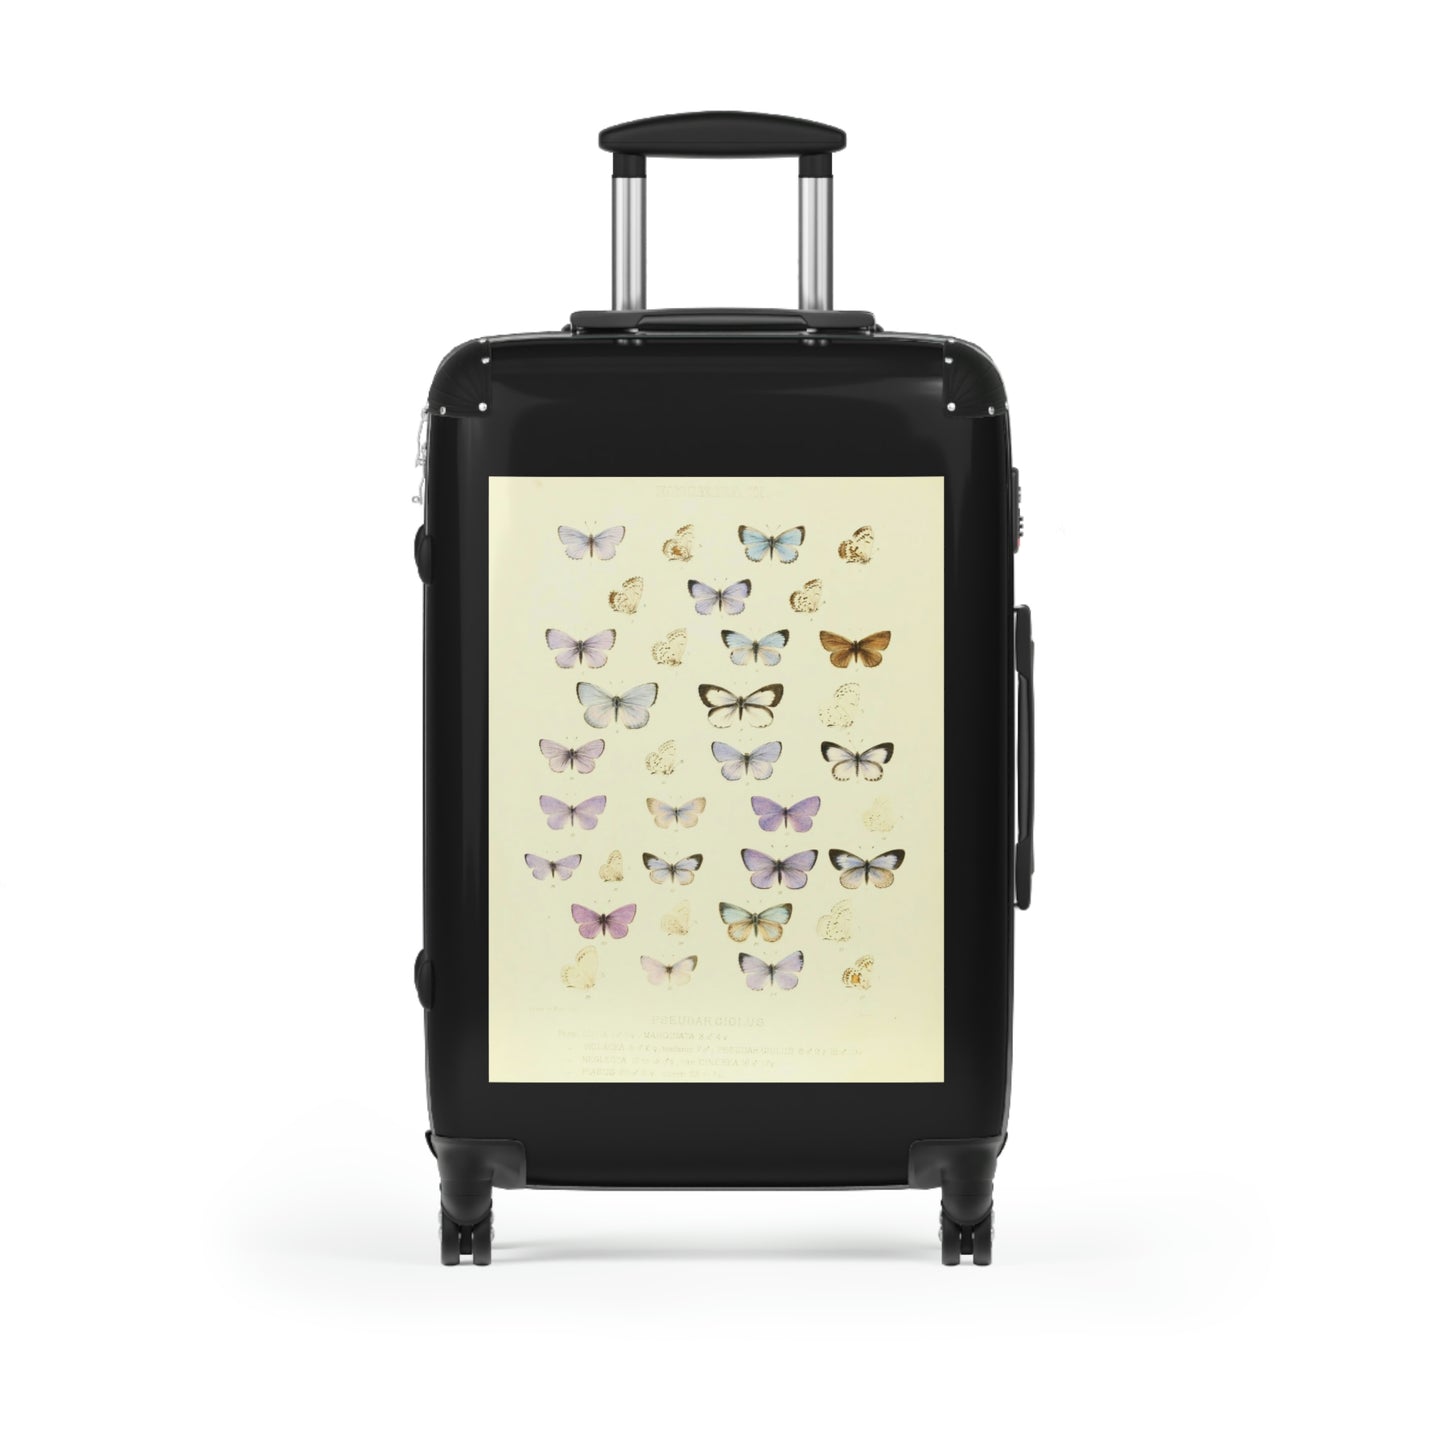 Getrott Butterflies of North America Lycæna Pseudargiolus Lucia Marginata Violocea Pseudar Giolus Neglecta Cinerea Piasus Aberr Cabin Suitcase Carry-On Travel Check Luggage 4-Wheel Spinner Suitcase Bag Multiple Colors and Sizes-Bags-Geotrott